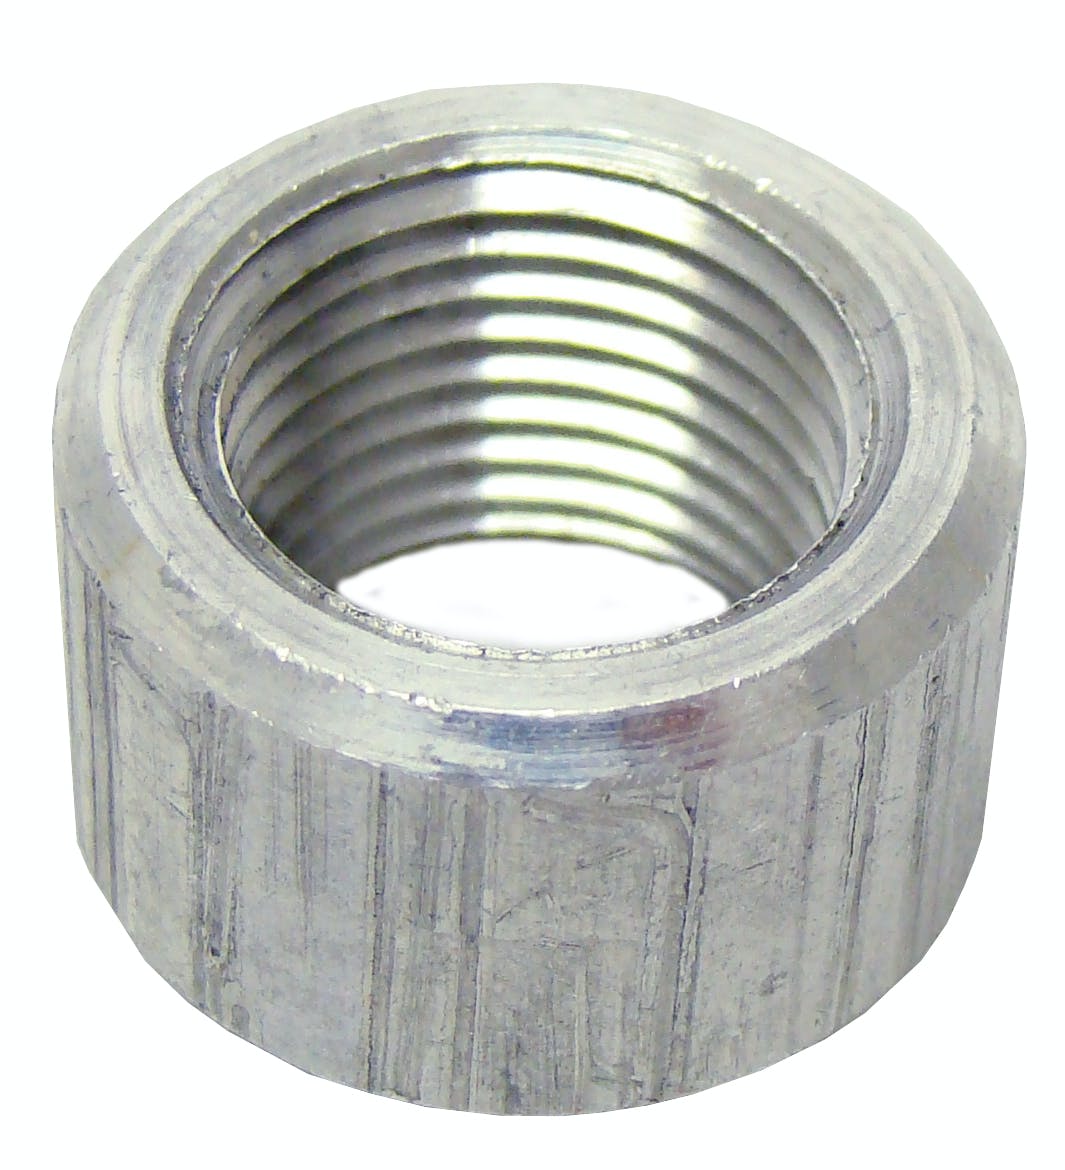 Northern Radiator Z17643 Weldable Pipe Thread Bung